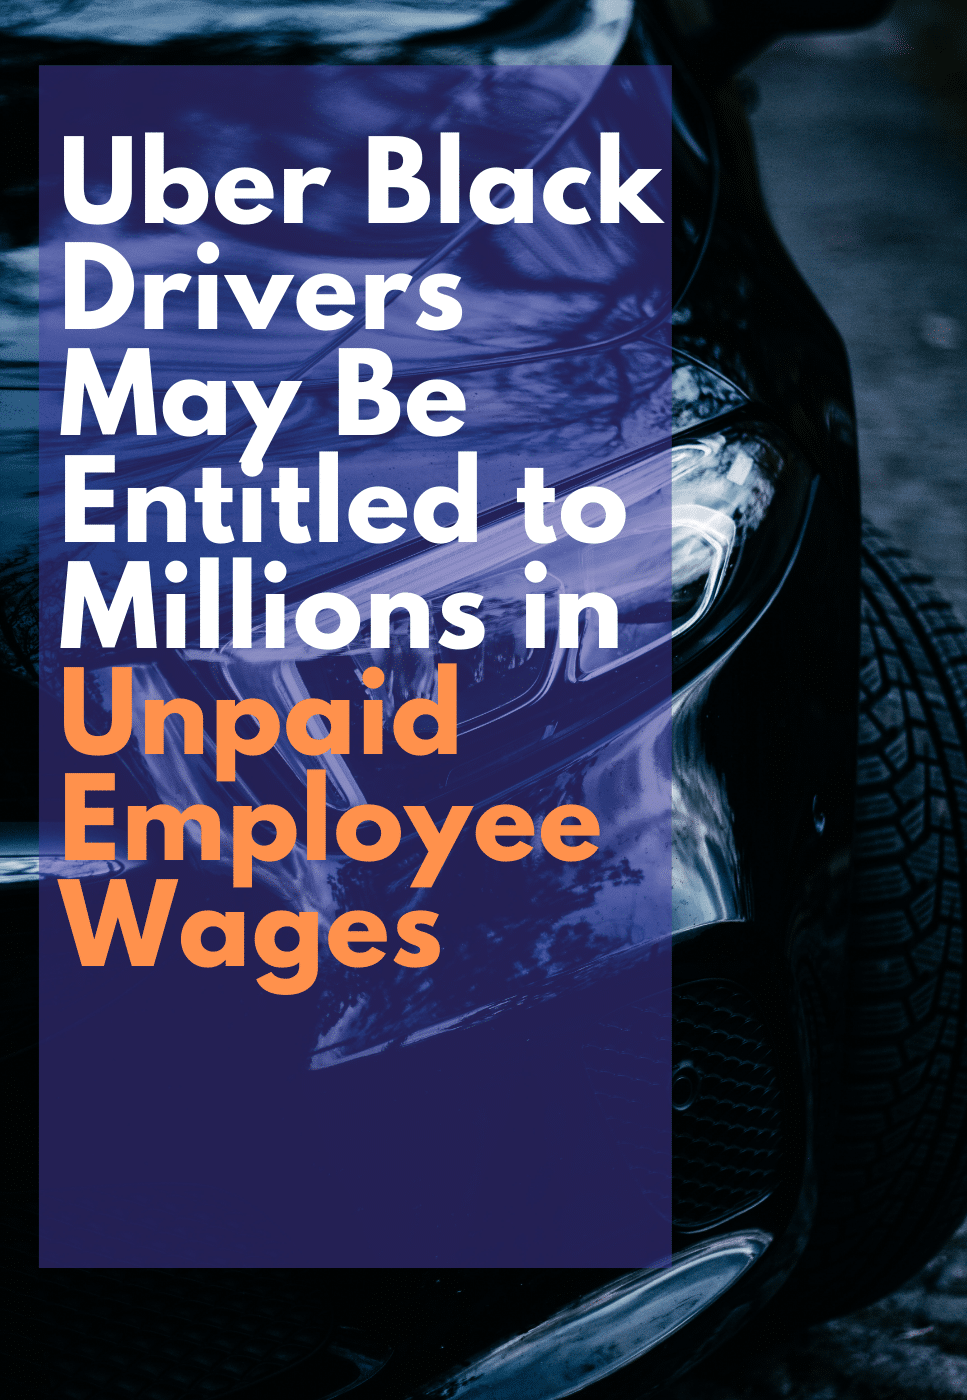 “Uber Black” Drivers May Be Entitled to Millions in Unpaid Employee Wages